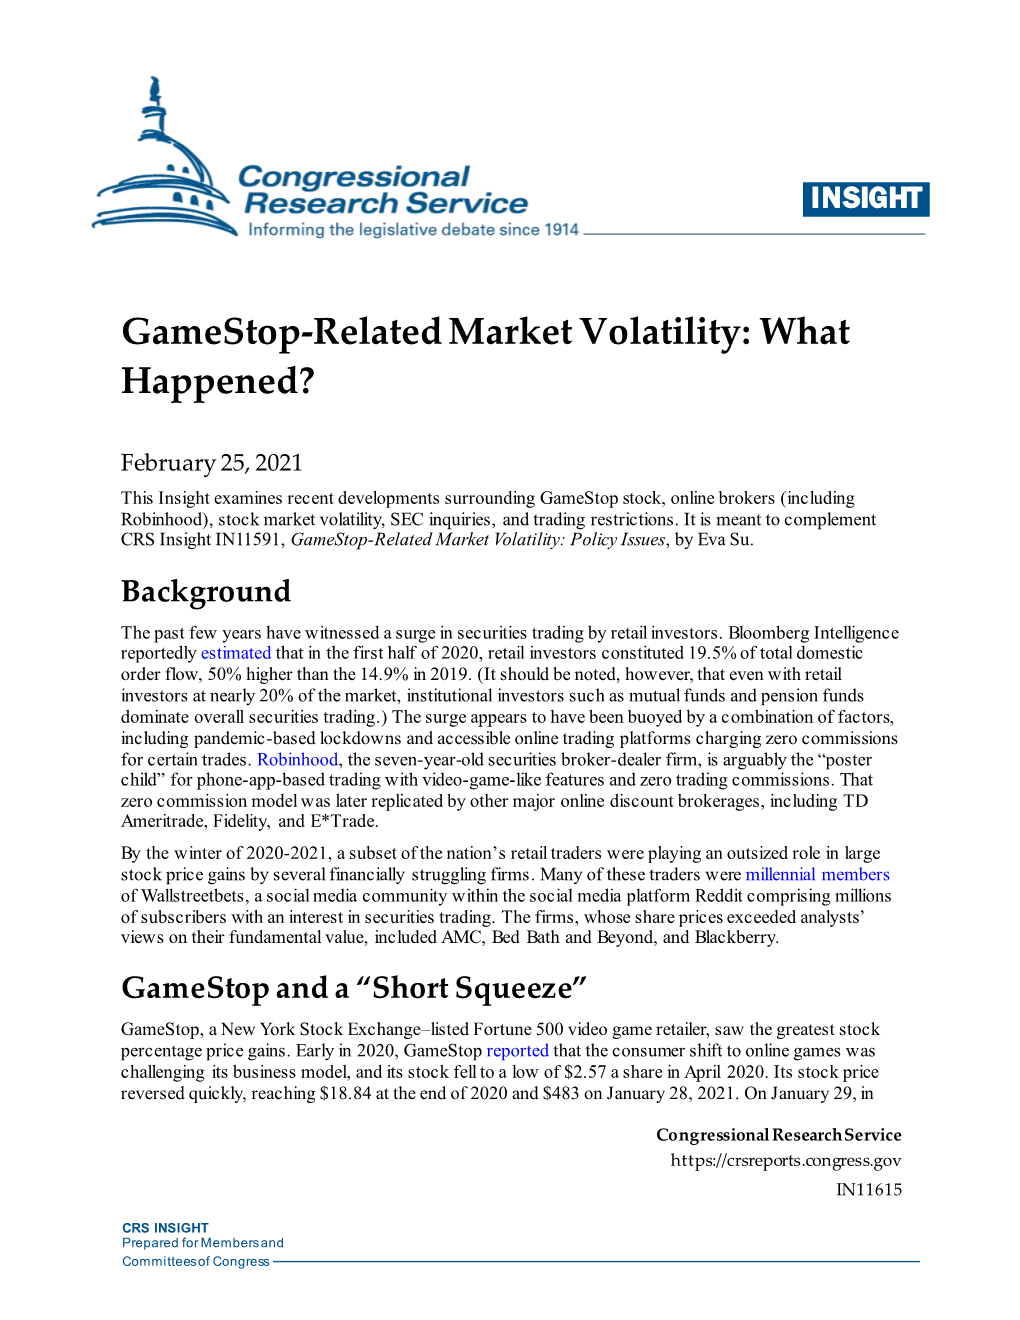 Gamestop-Related Market Volatility: What Happened?